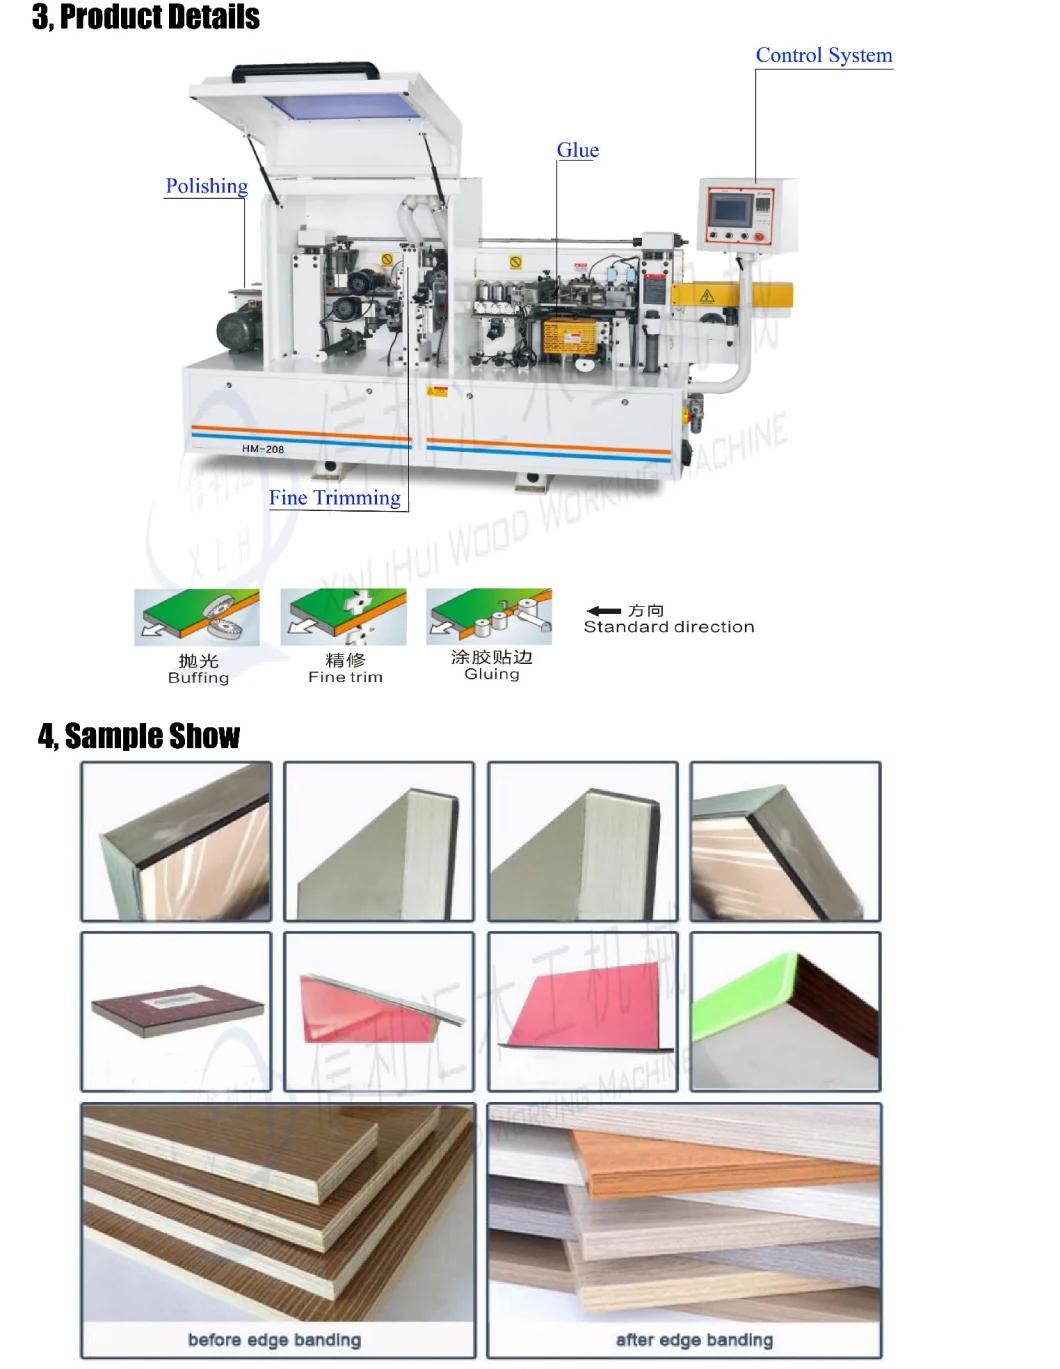 Edge Banding Machine for MDF Board Made in China Easy/ Simple/ Small Compact Edge Bander for Home Use for Premilling Melamine Board in Furniture Industry